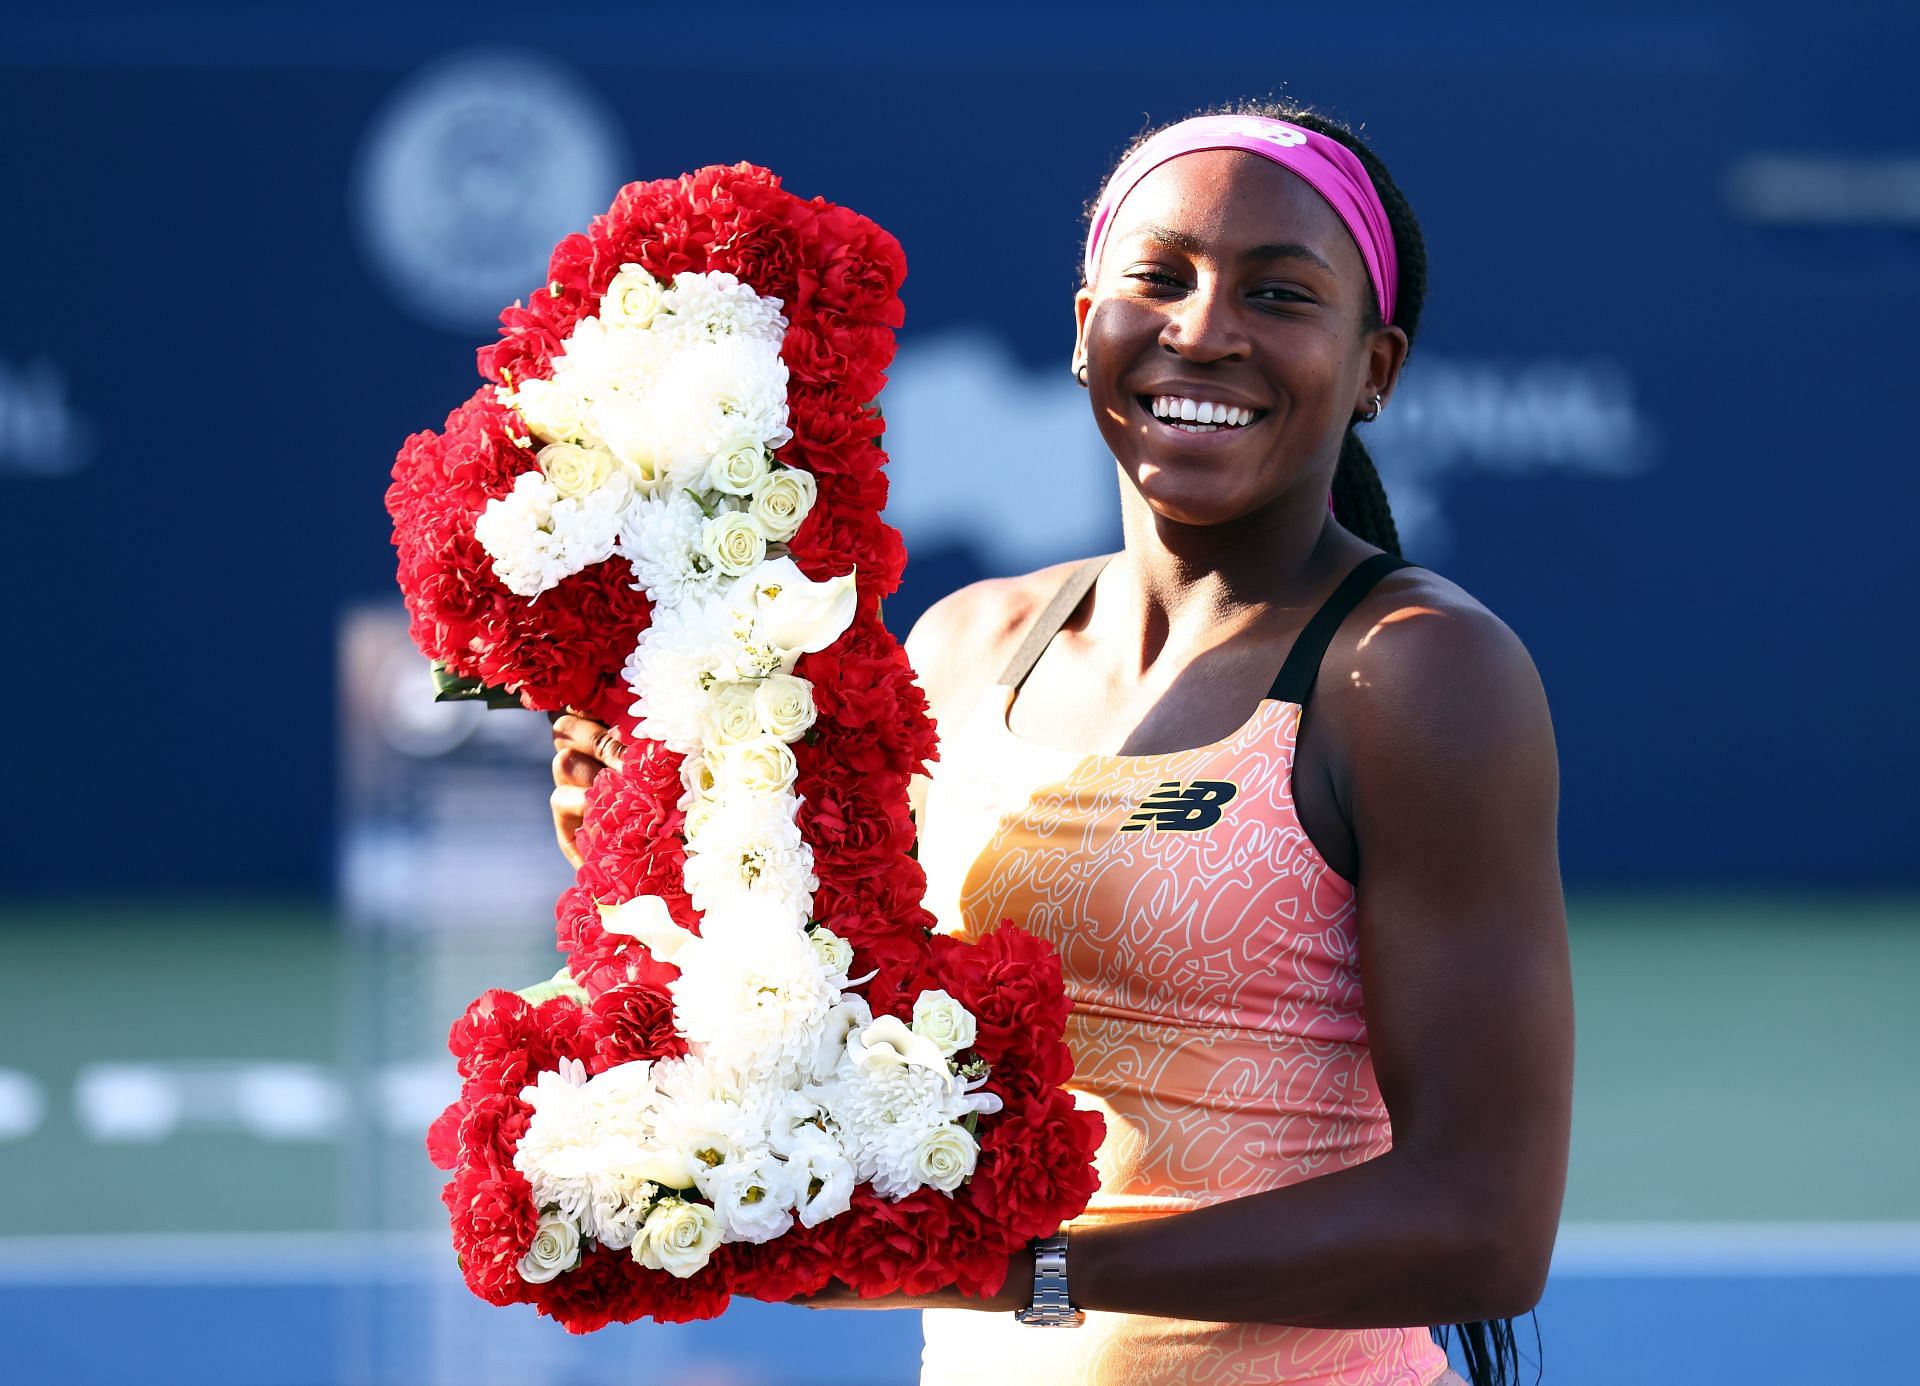 Coco Gauff exults after becoming the No. 1 in doubles rankings.